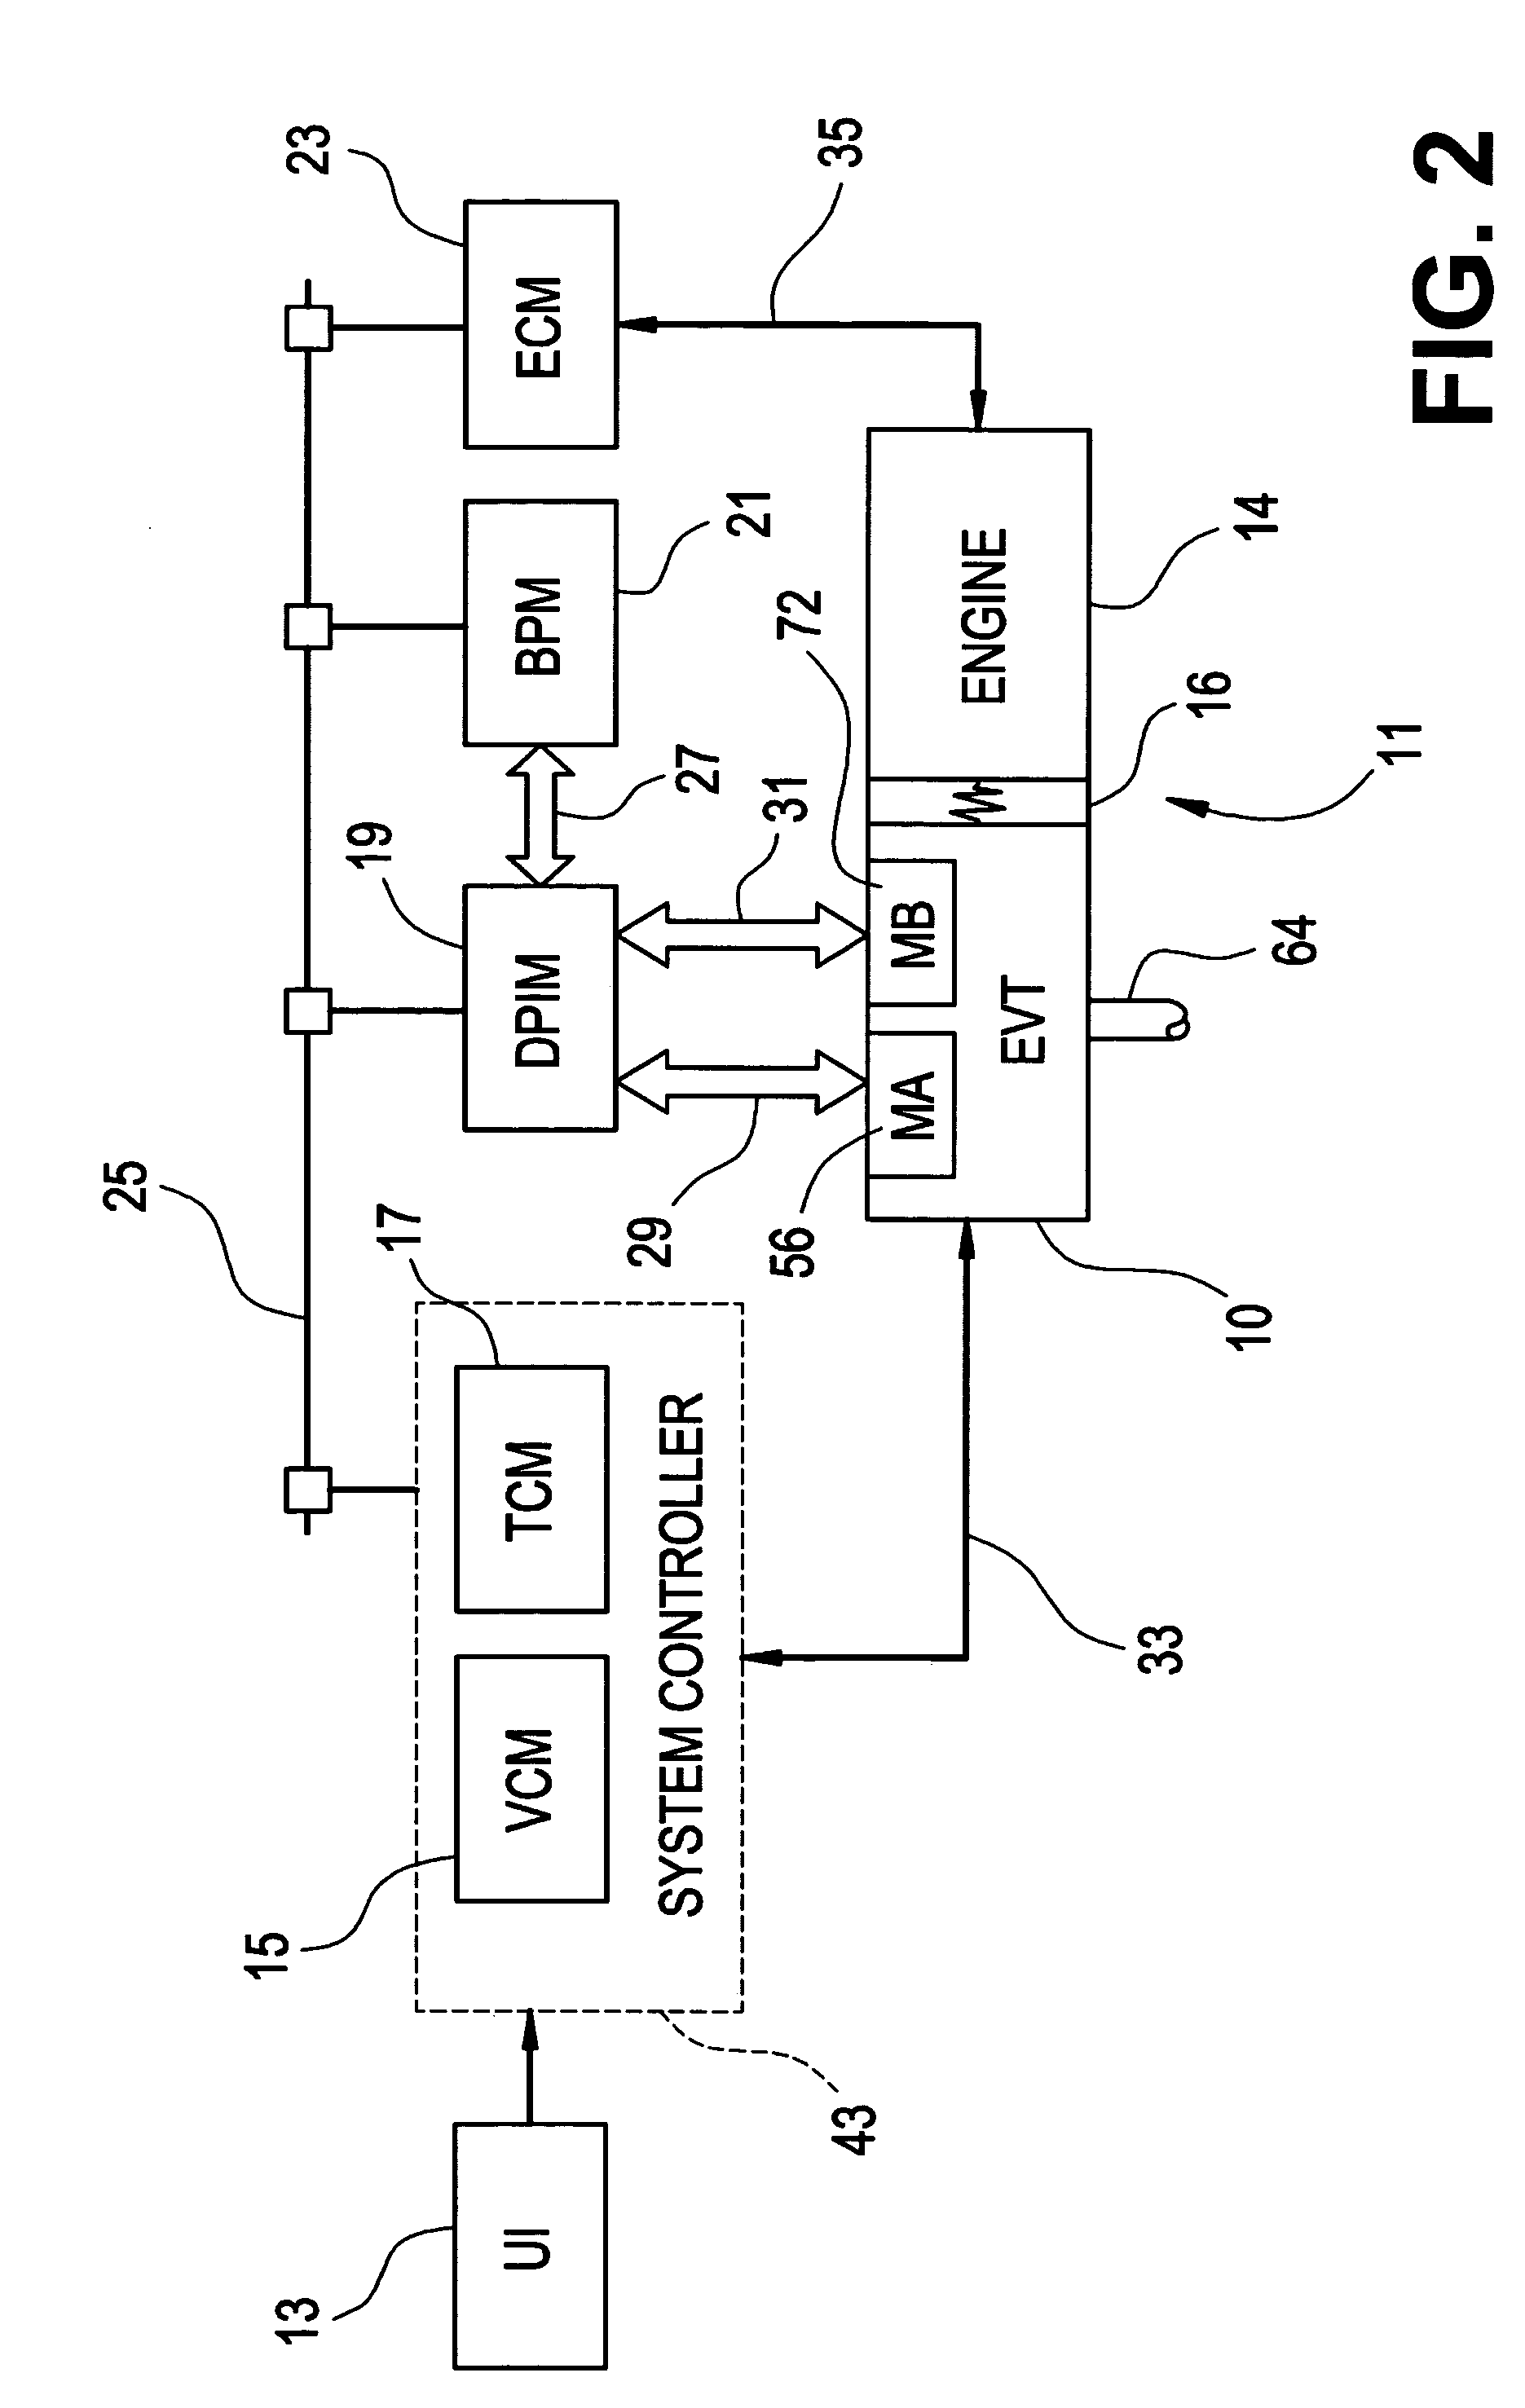 Diagnostic method for a torque control of an electrically variable transmission